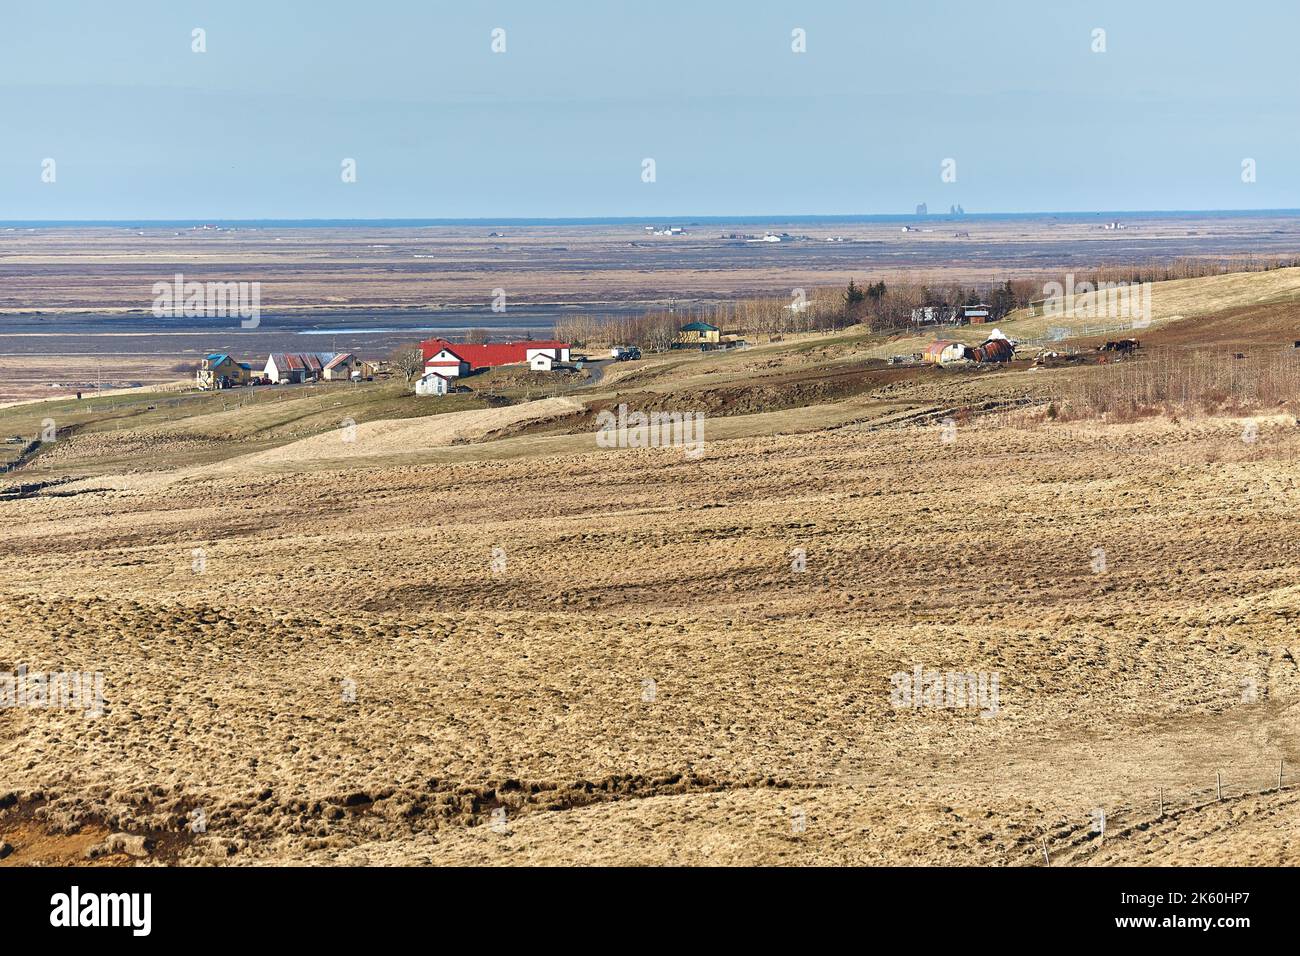 Iceland landscape with farmlands Stock Photo